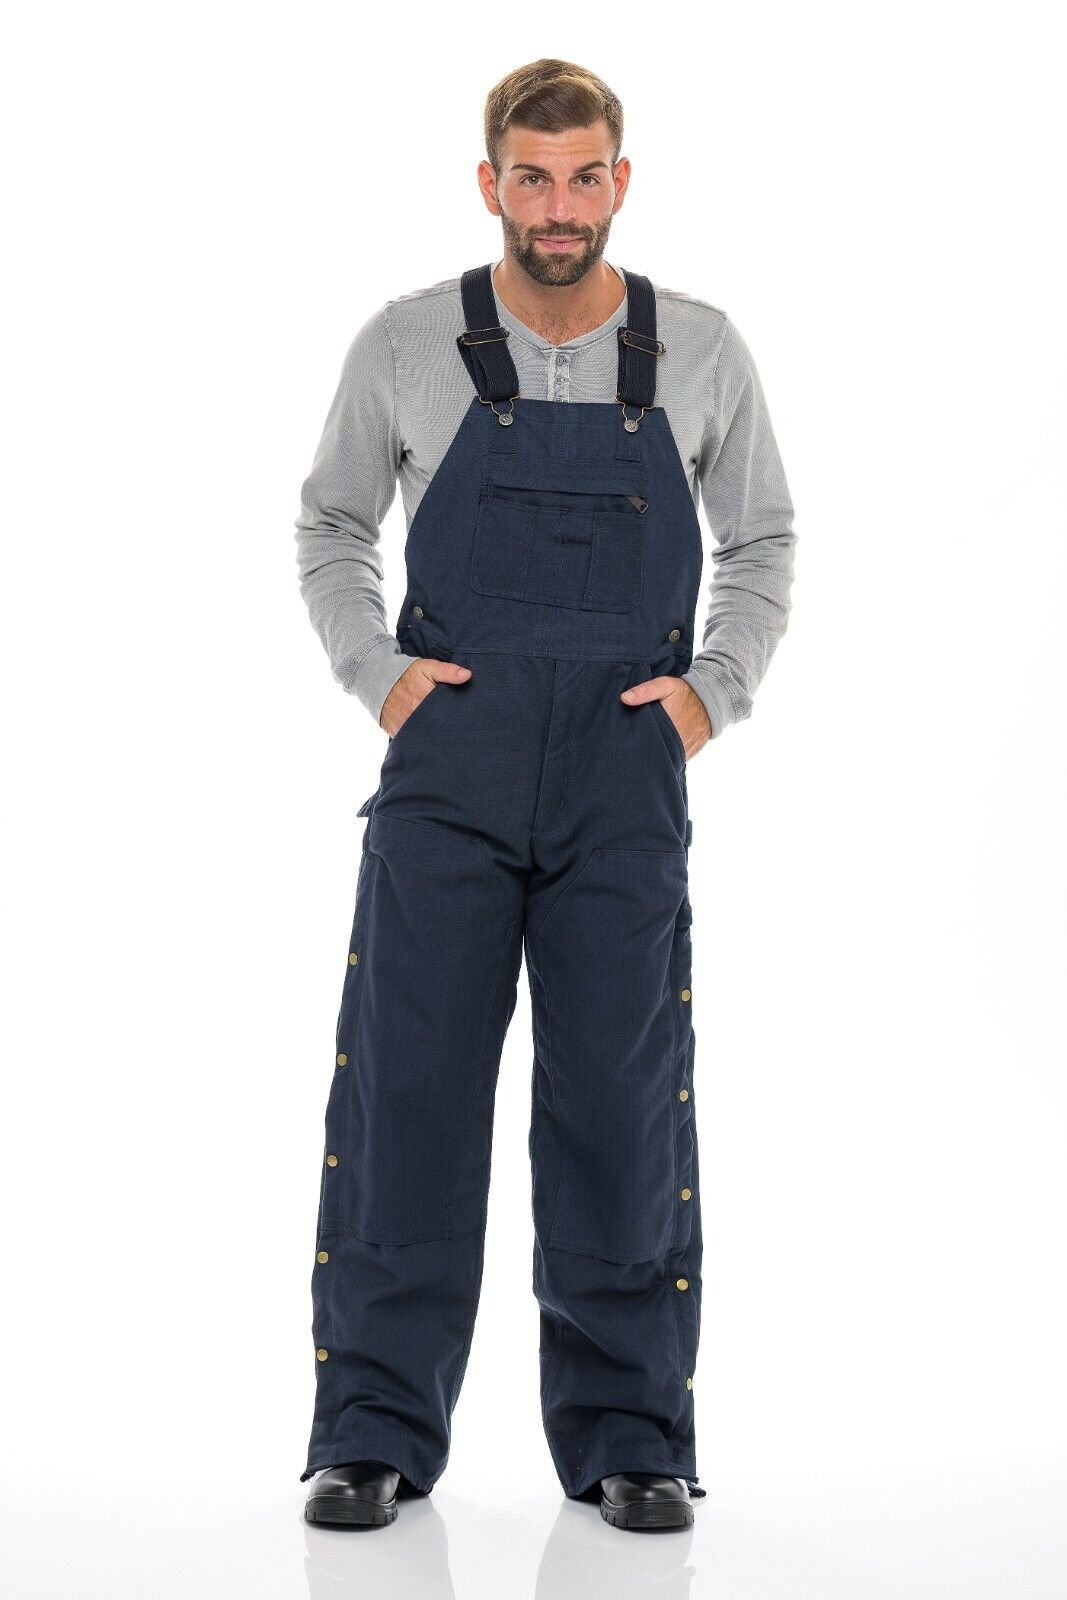 SkylineWears Men's Quilt Lined Leg Zipper To Thigh High Bib Overalls Loose Fit Insulate Pants